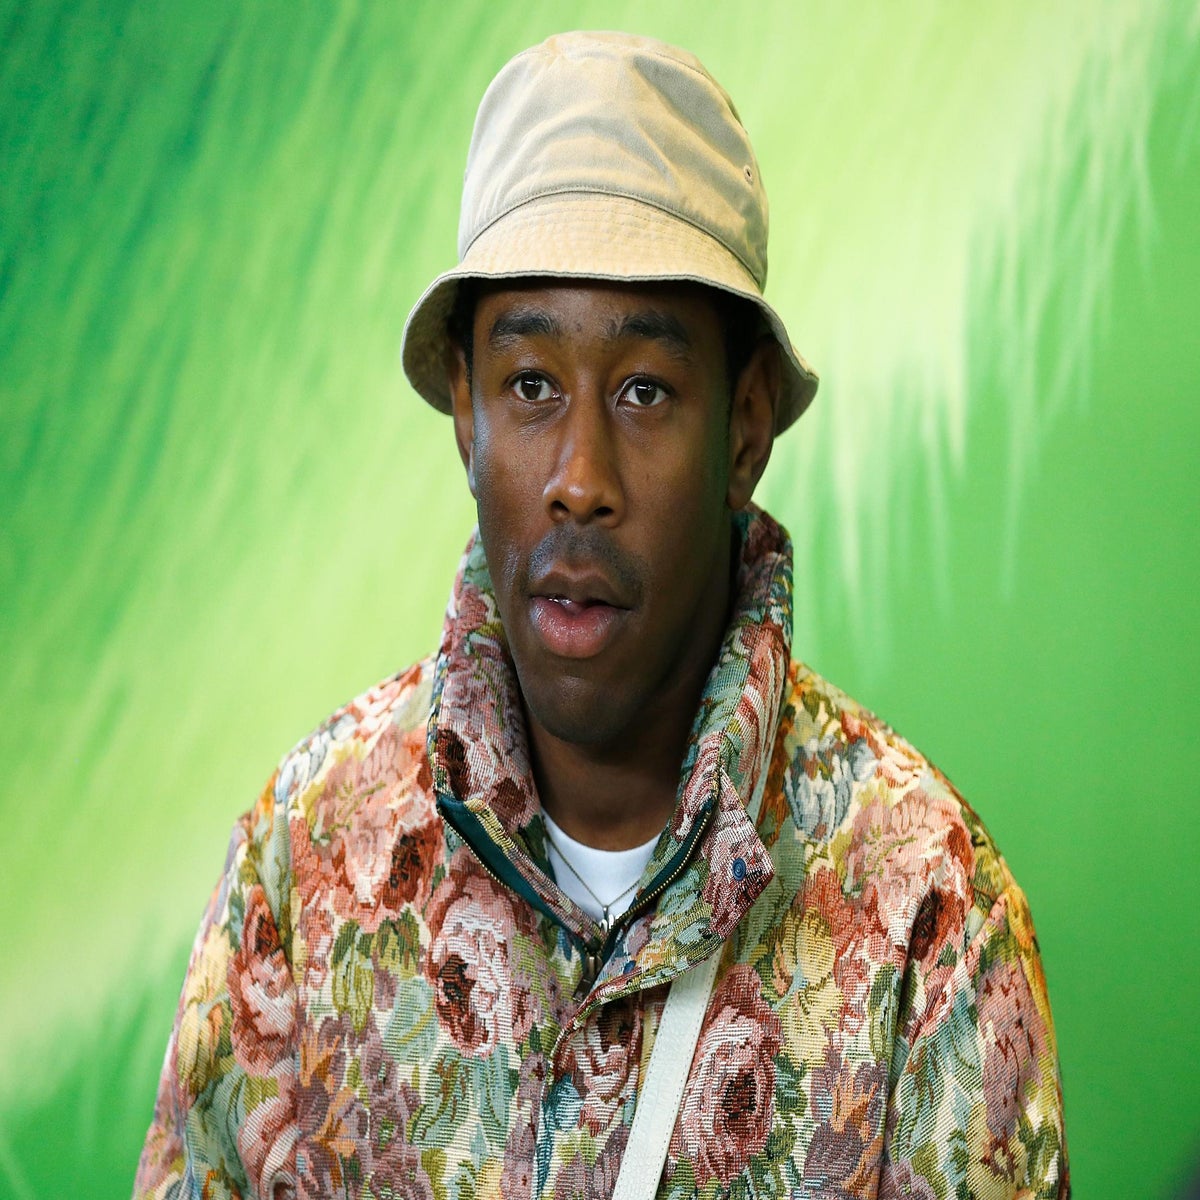 Tyler, the Creator Levels Up His Watch Game